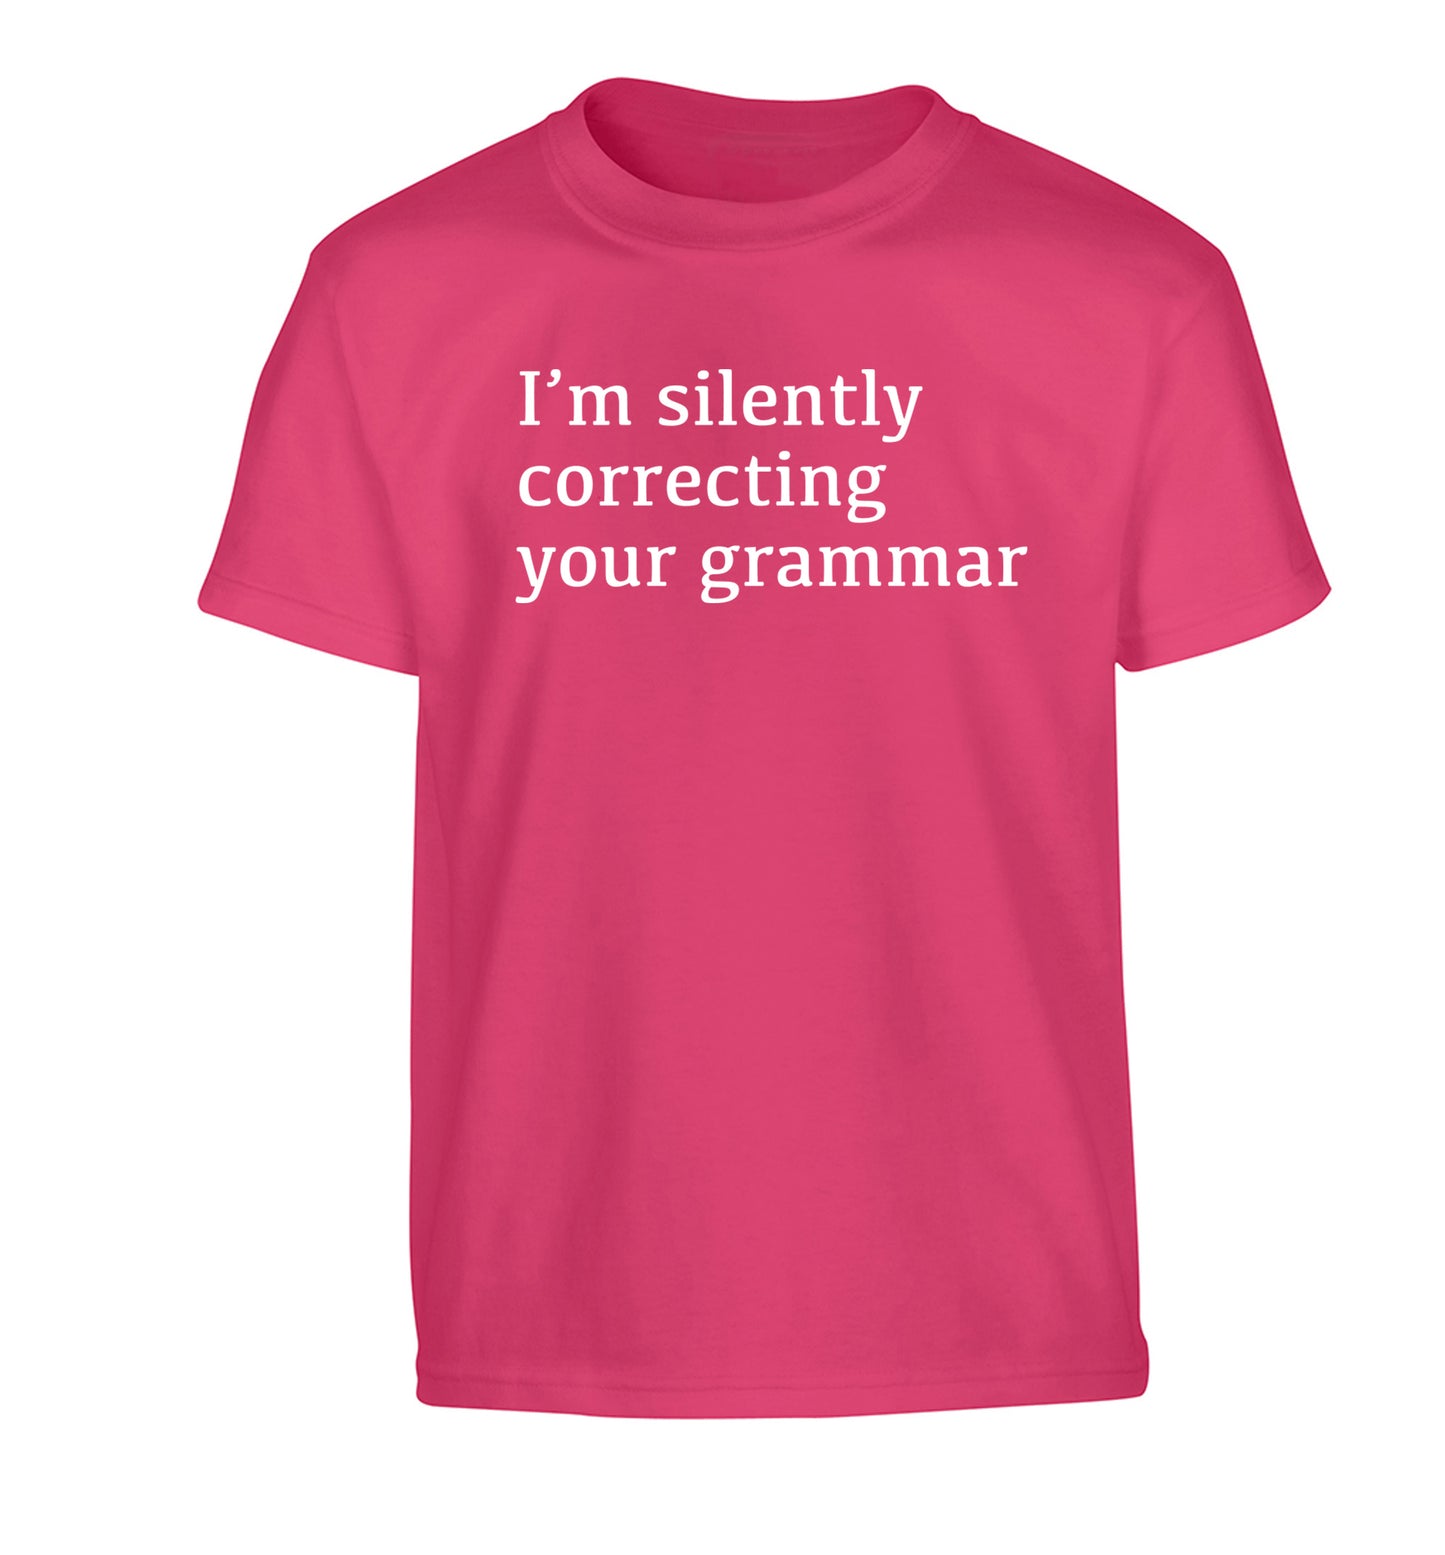 I'm silently correcting your grammar  Children's pink Tshirt 12-14 Years